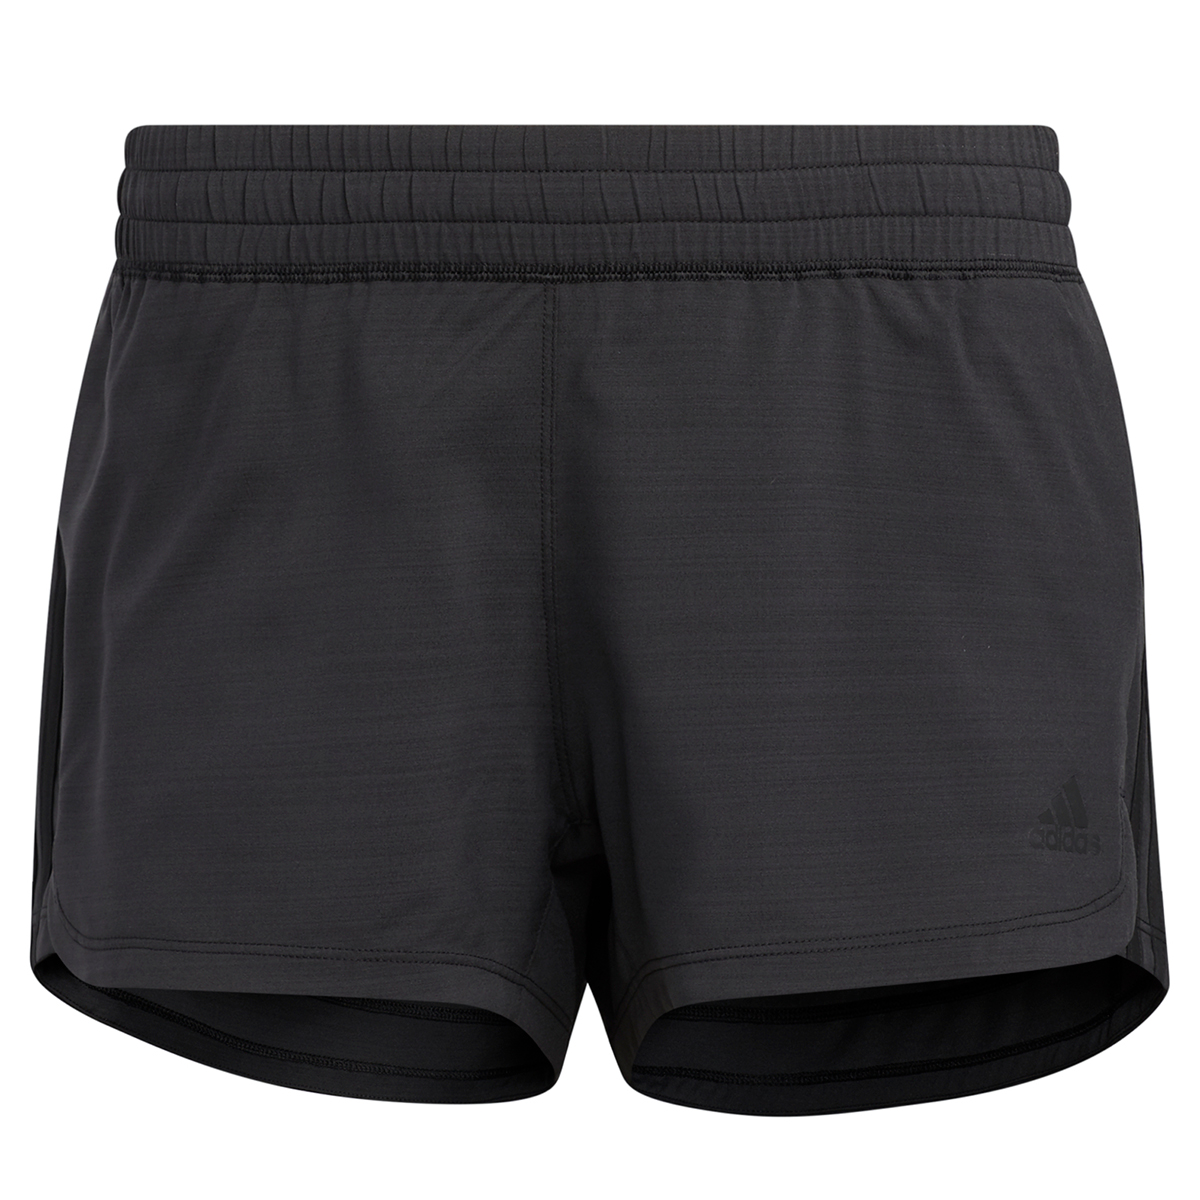 Adidas Women's Pacer Shorts